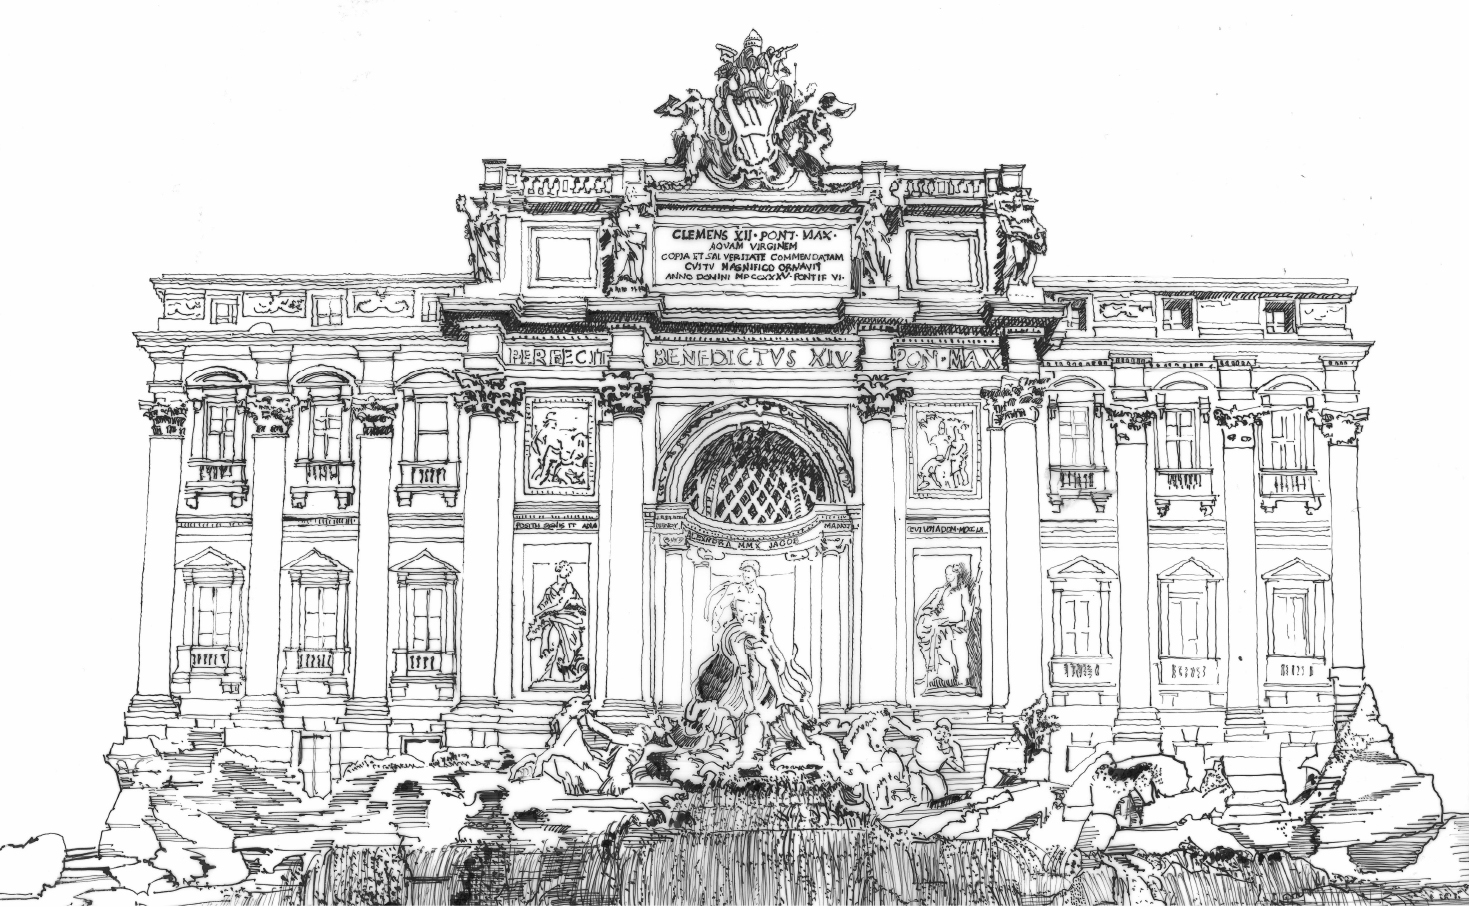 Black and white pen and ink sketch of Trevi Fountain by Manoj Dalaya, FAIA.